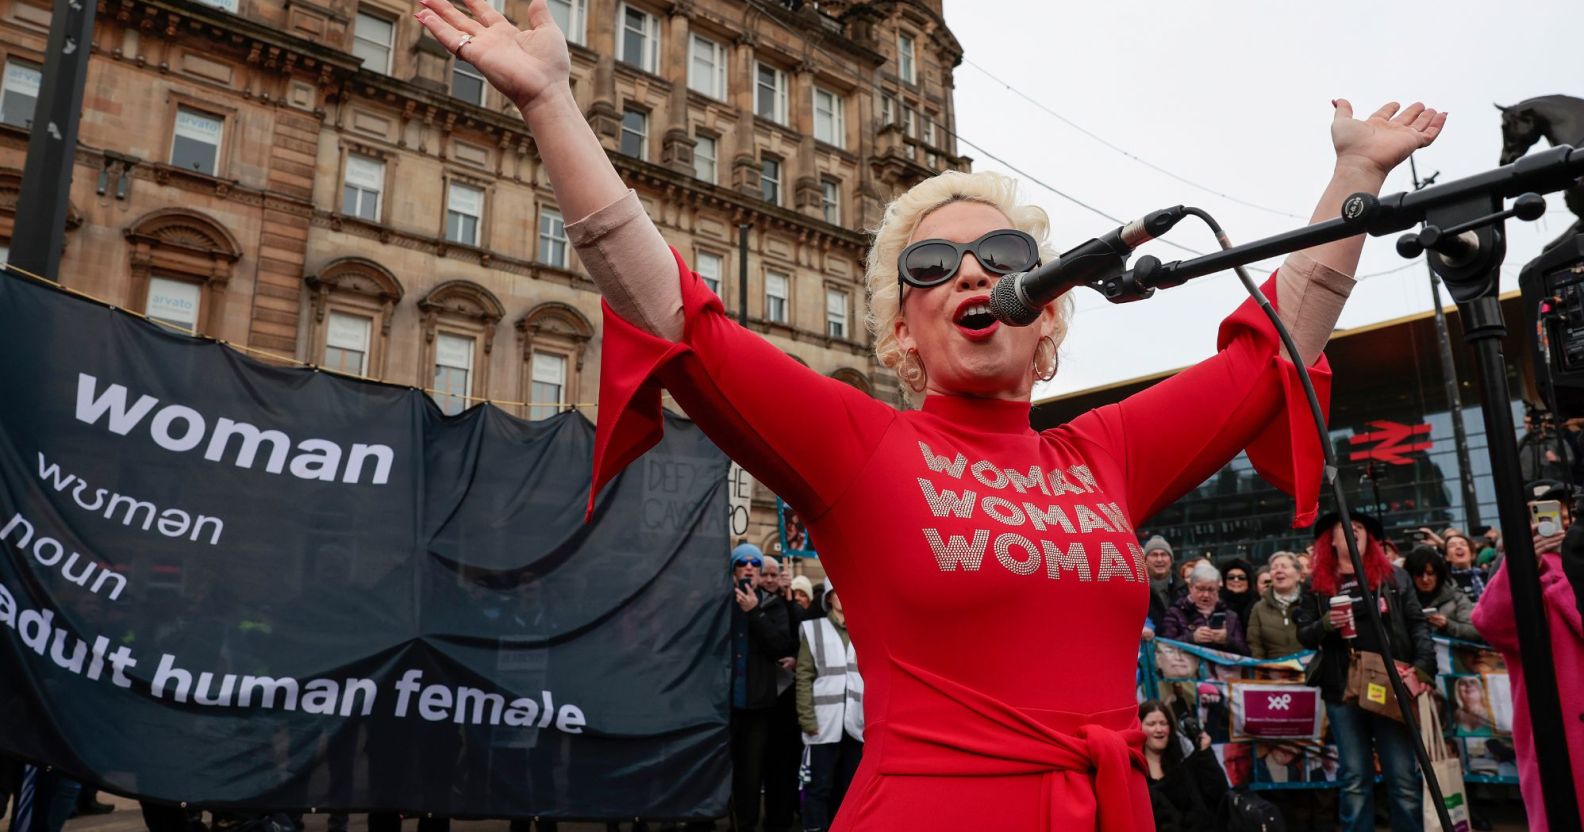 Anti-trans activist Kellie-Jay Keen, also known as Posie Parker, wears a red outfit as she speaks at an event which was met with counter-protesters